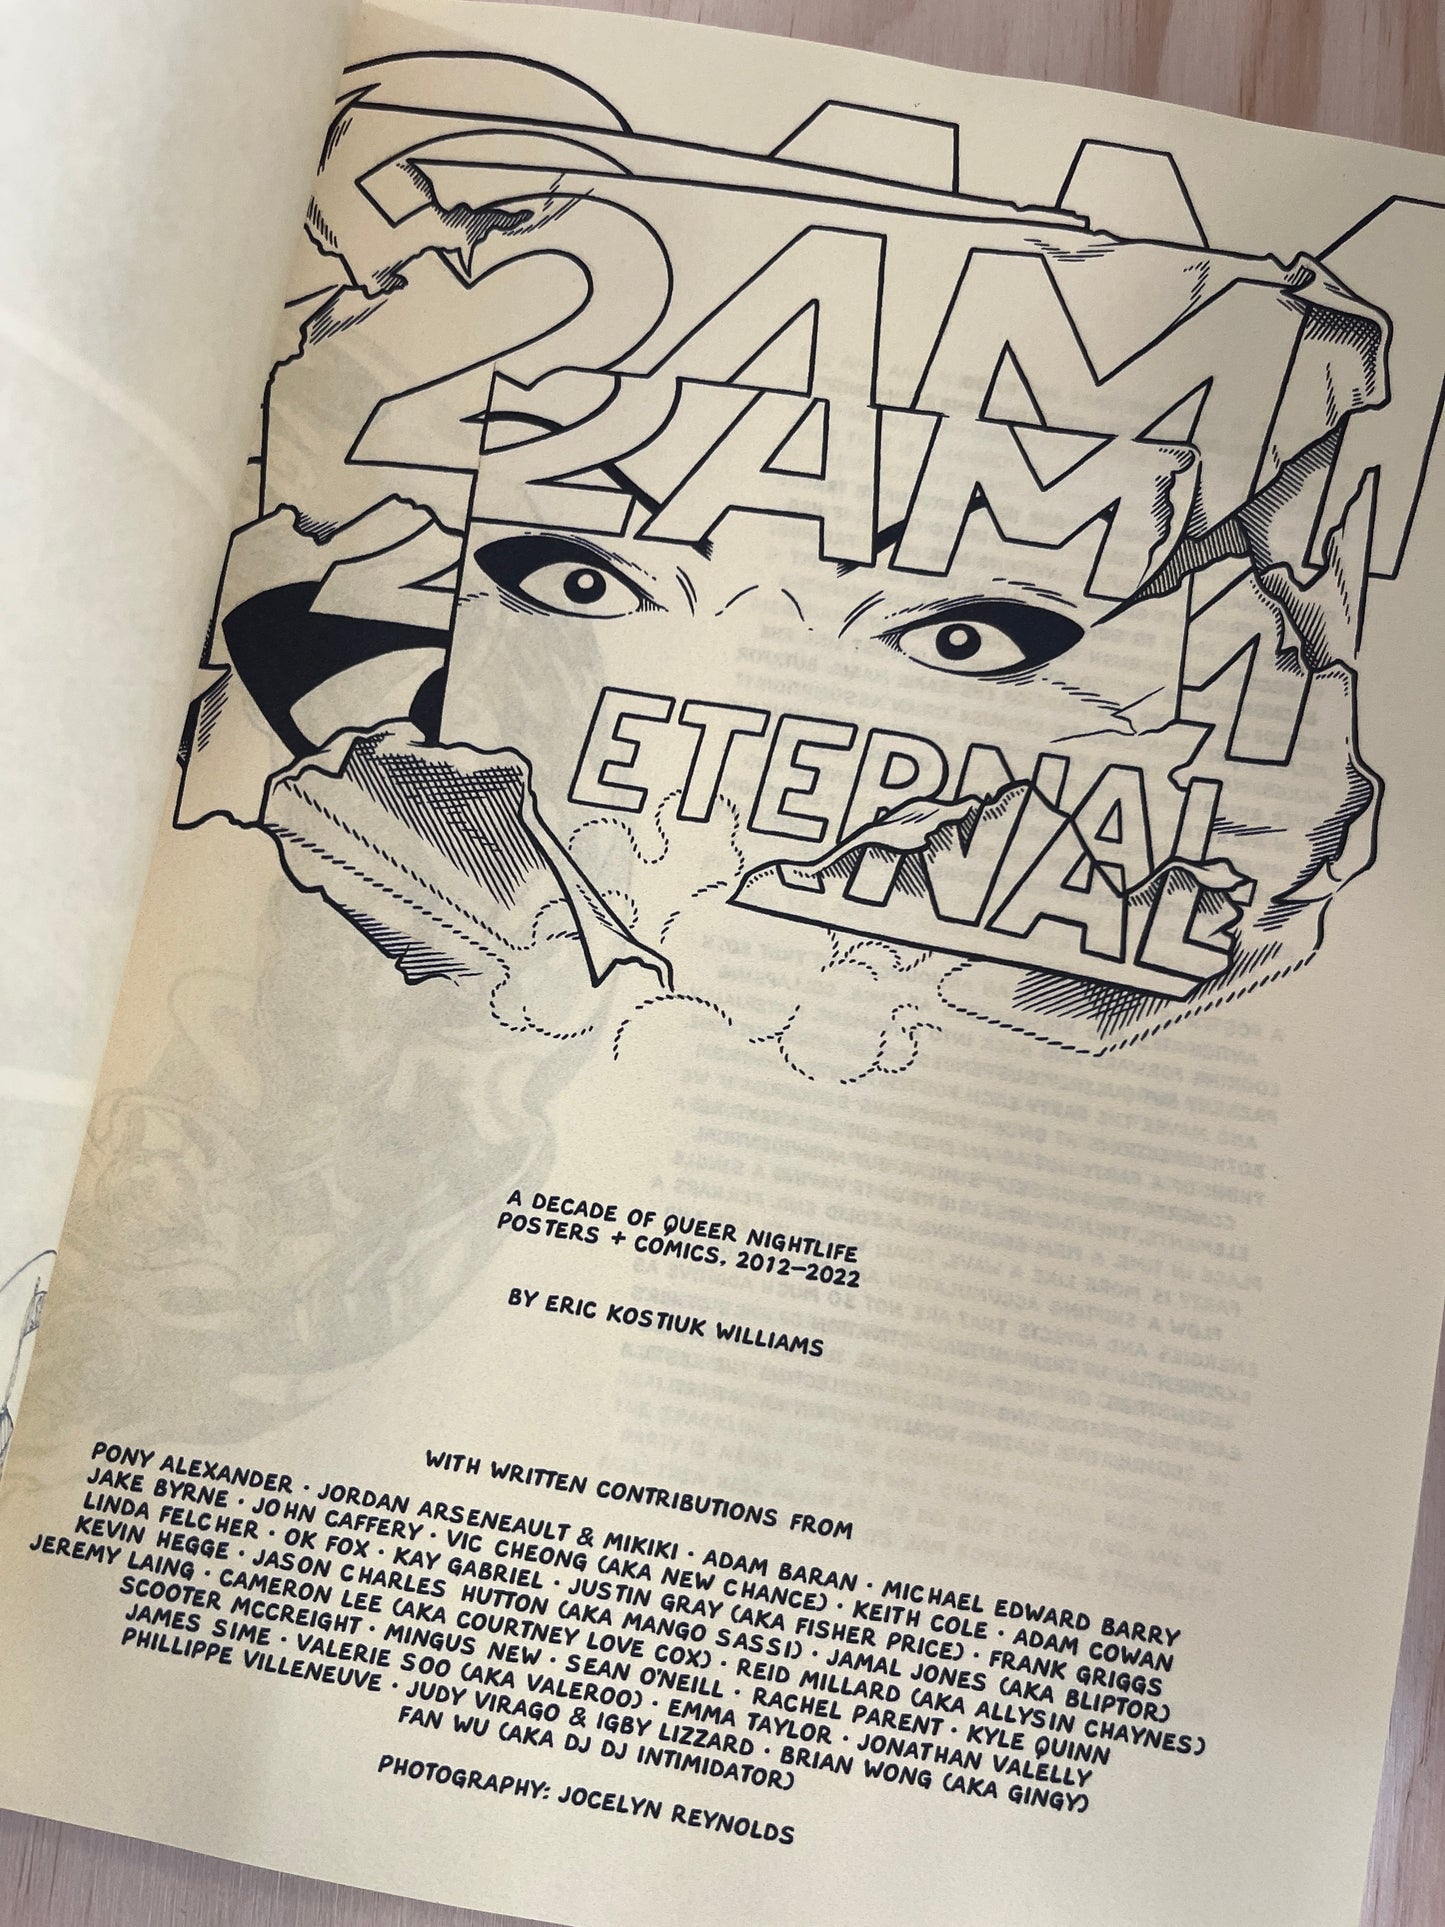 2am eternal: a decade of queer nightlife posters + comics